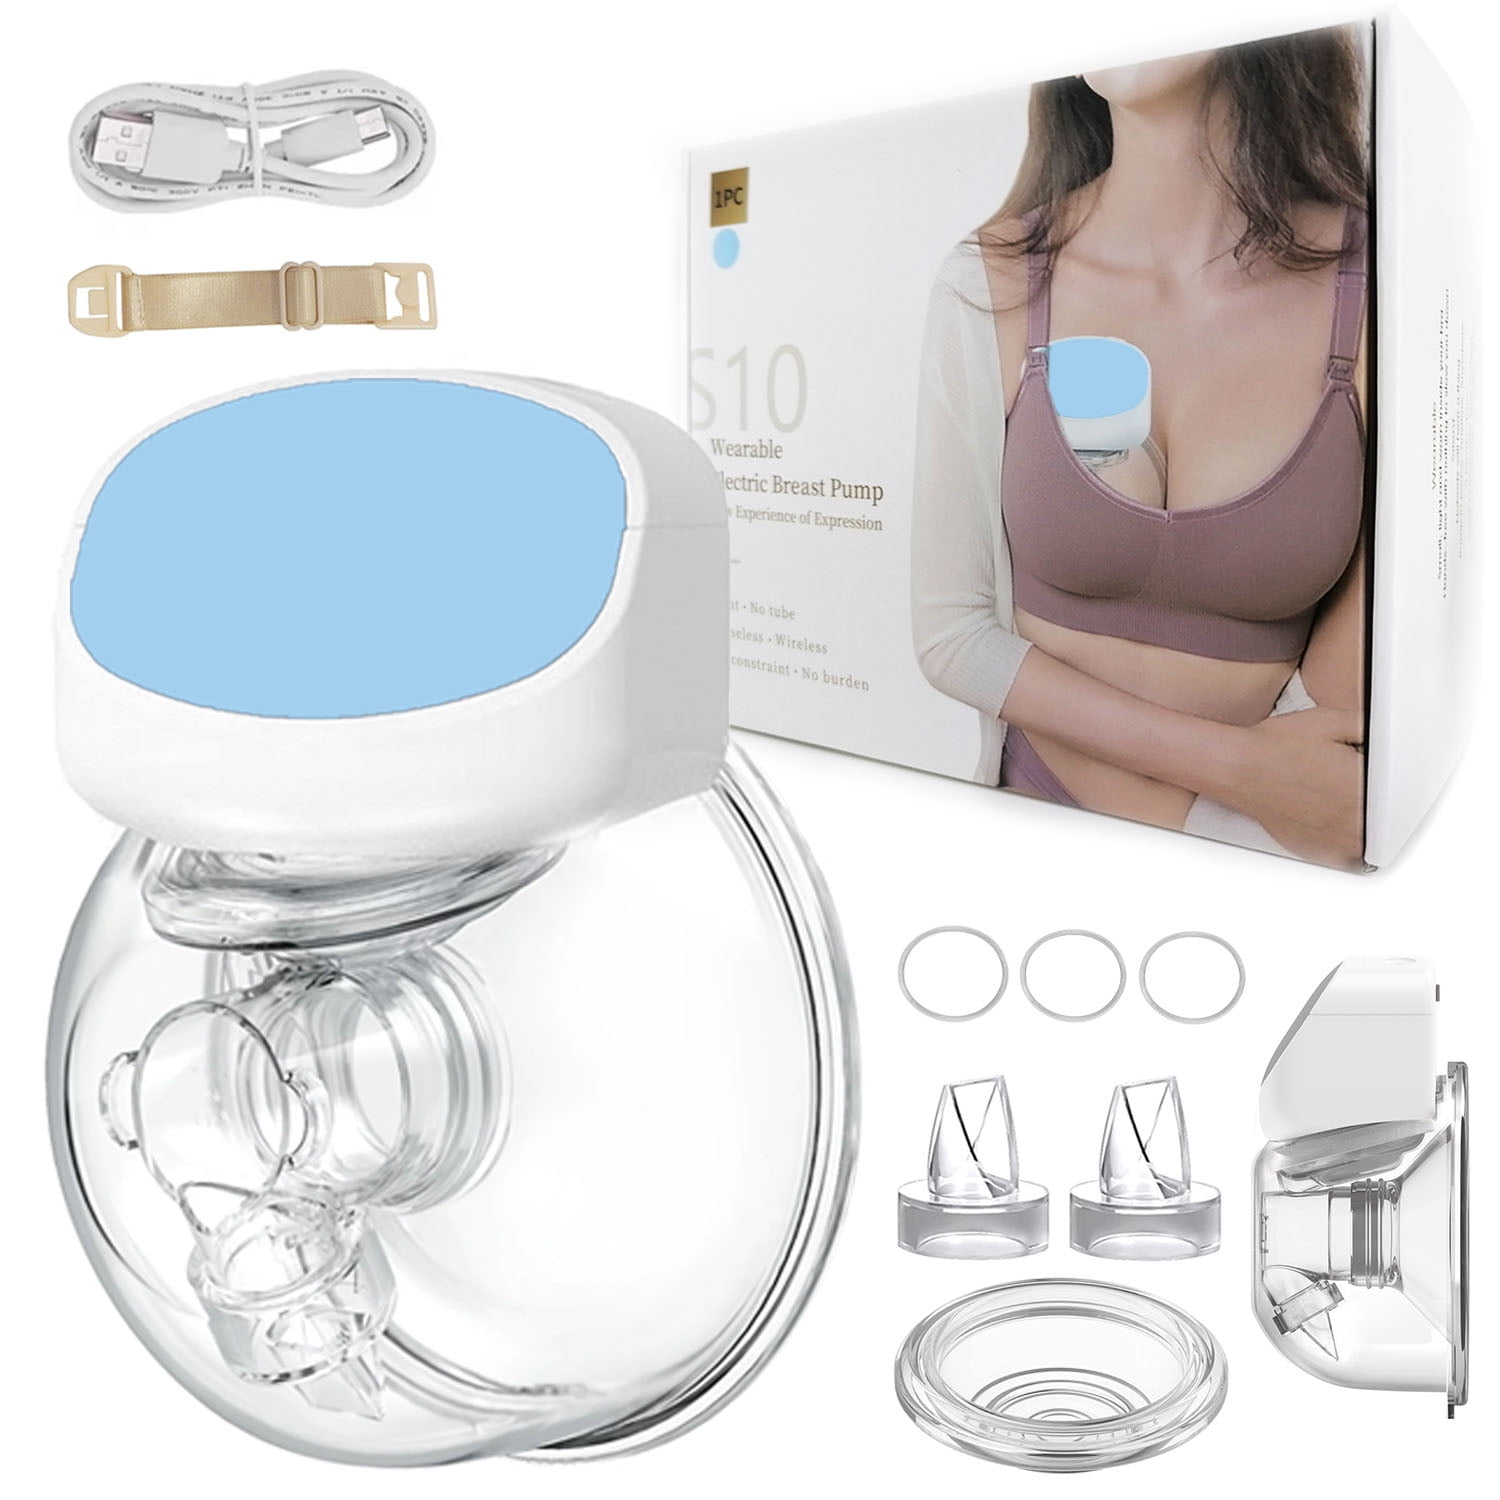 Breast Pump Electric, Portable Wireless Electric Breast Pump with 2 Modes 5  Levels Silicone Hands Free Breastfeeding Breastpump Worn in-Bra, Low Noise  and Painless with Massage 24mm 